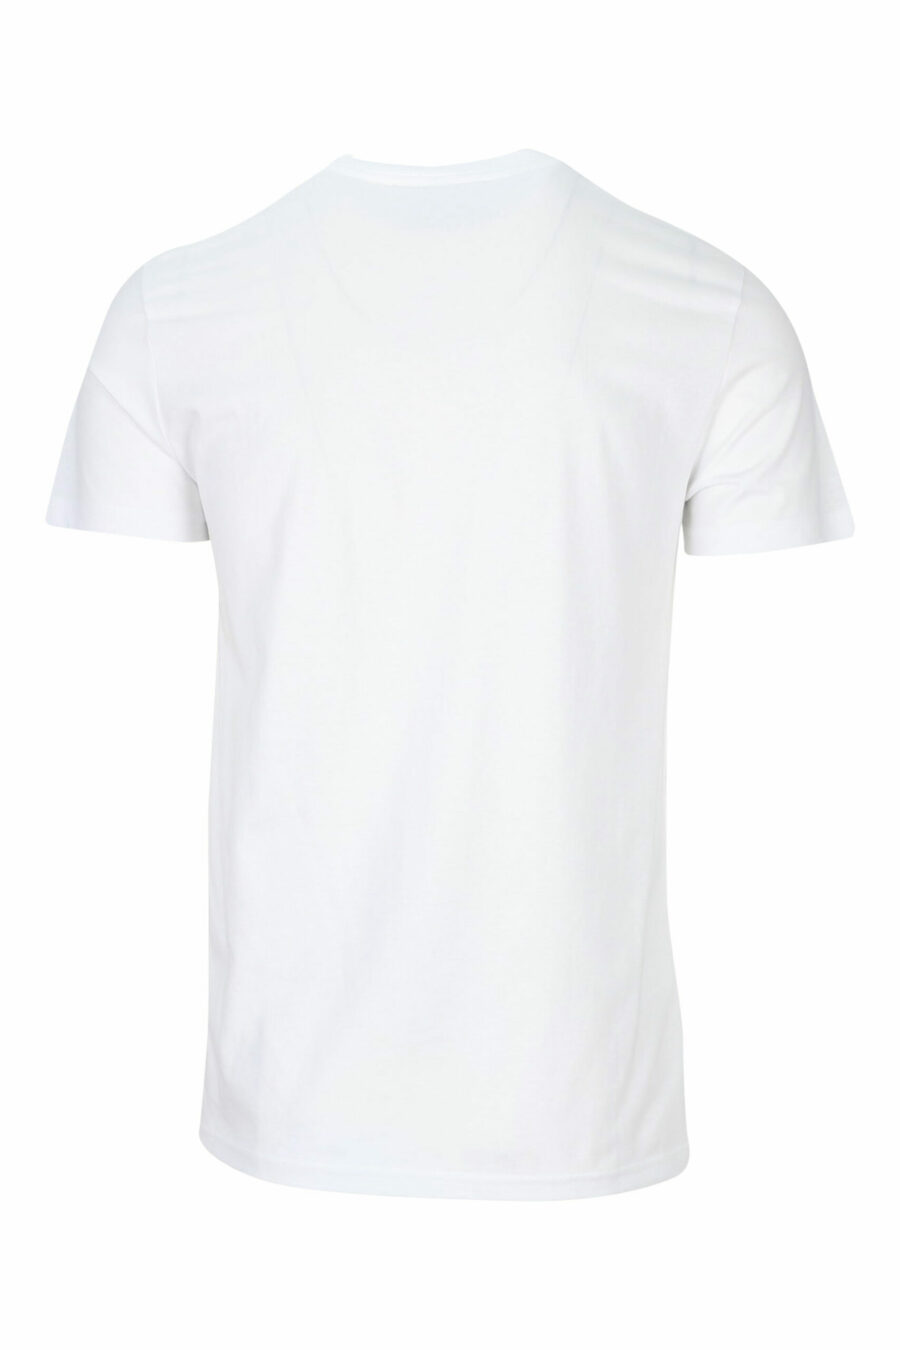 White T-shirt with shiny gold classic maxilogue - 8052019456738 1 scaled